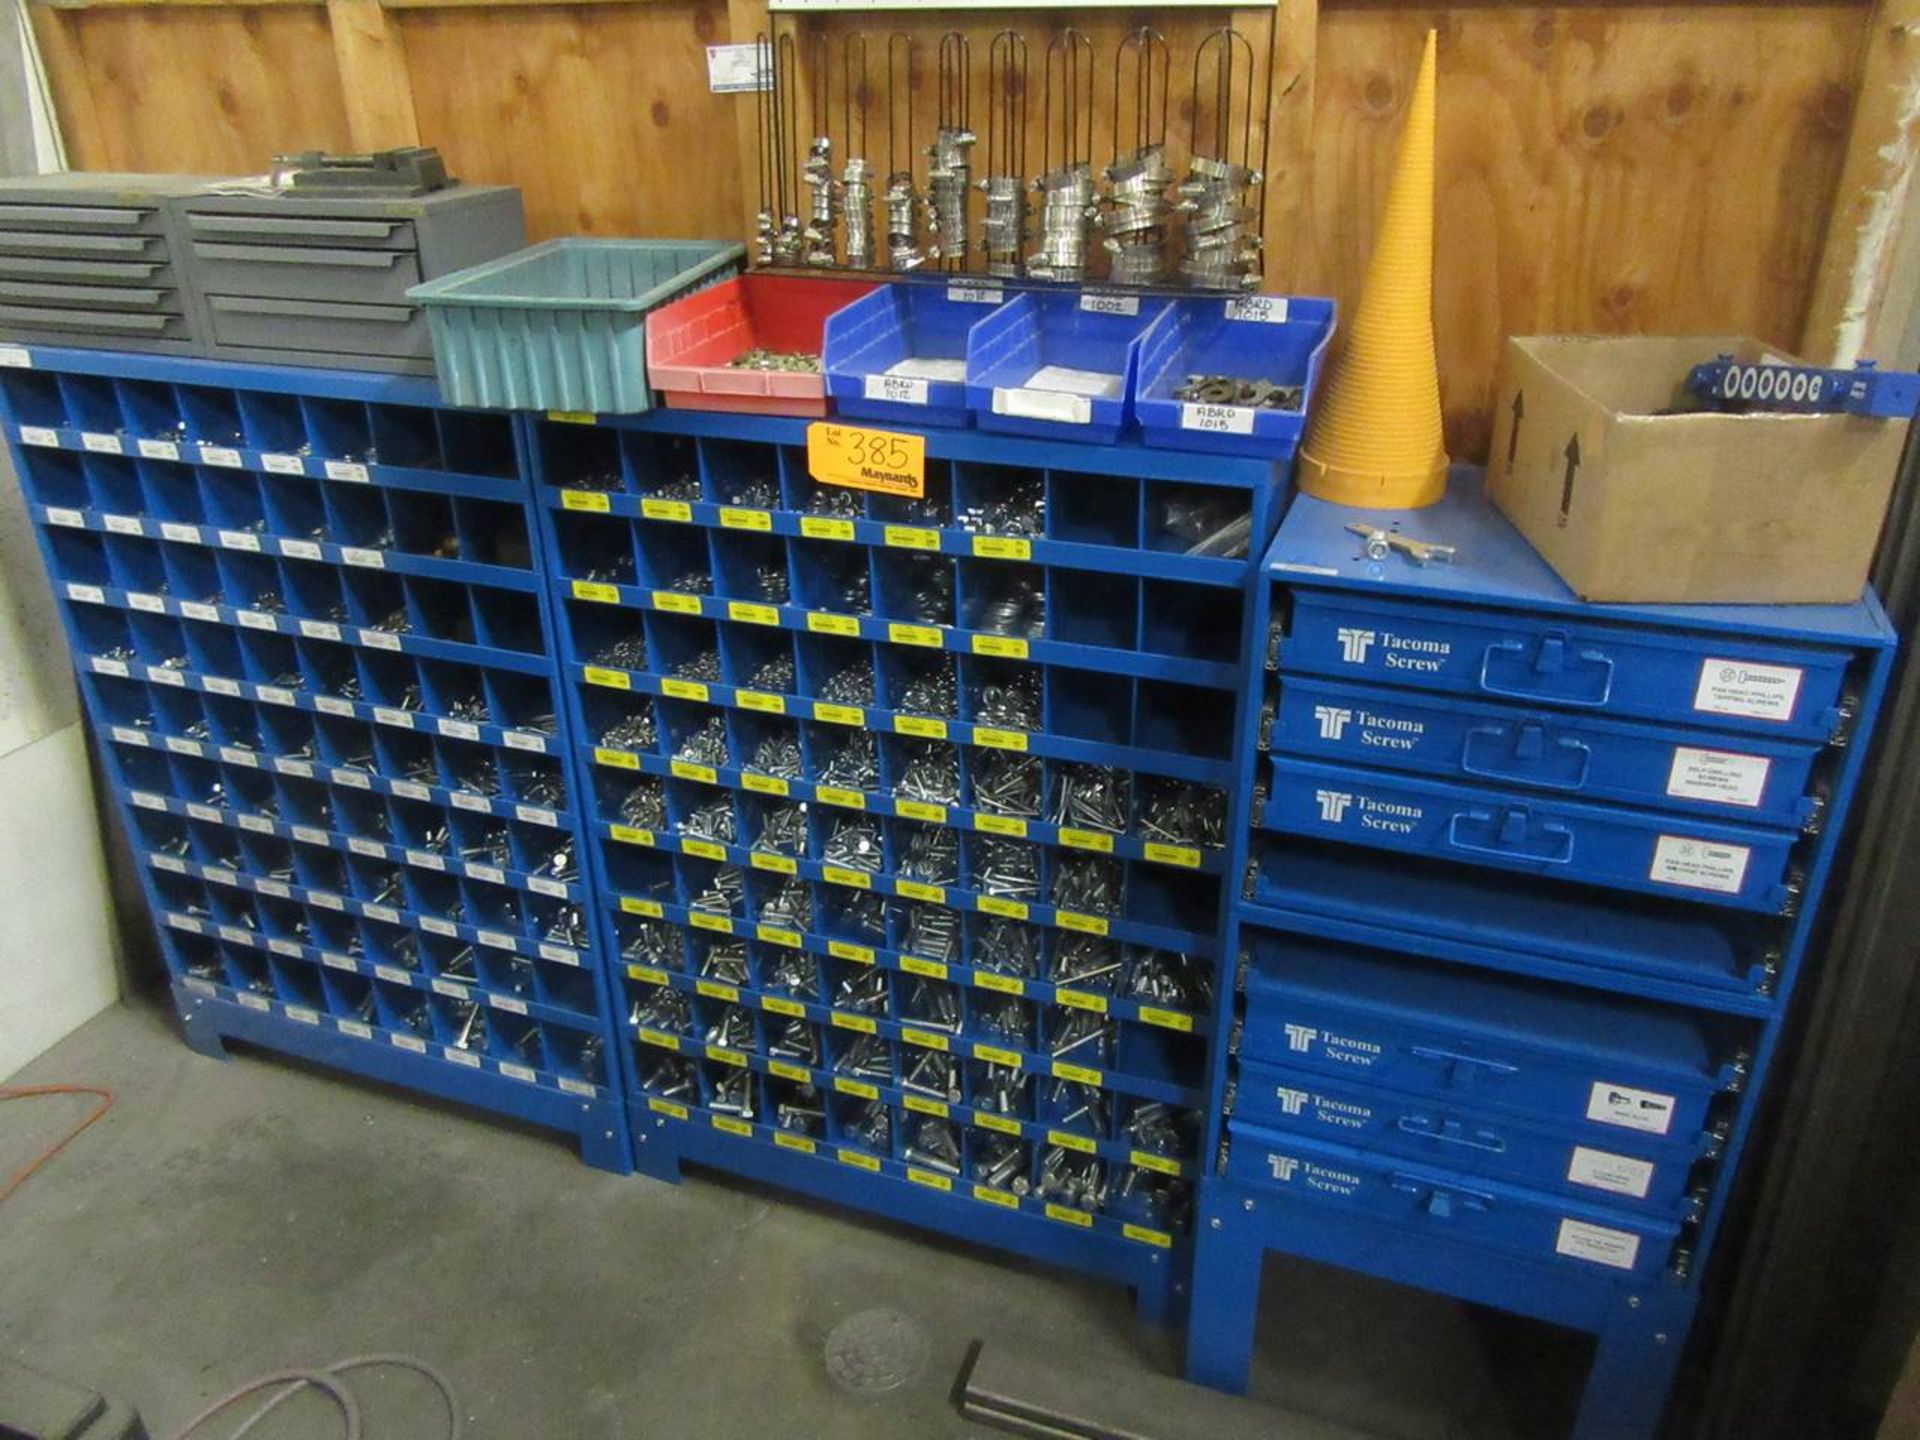 Lot of Bolt Bins with contents